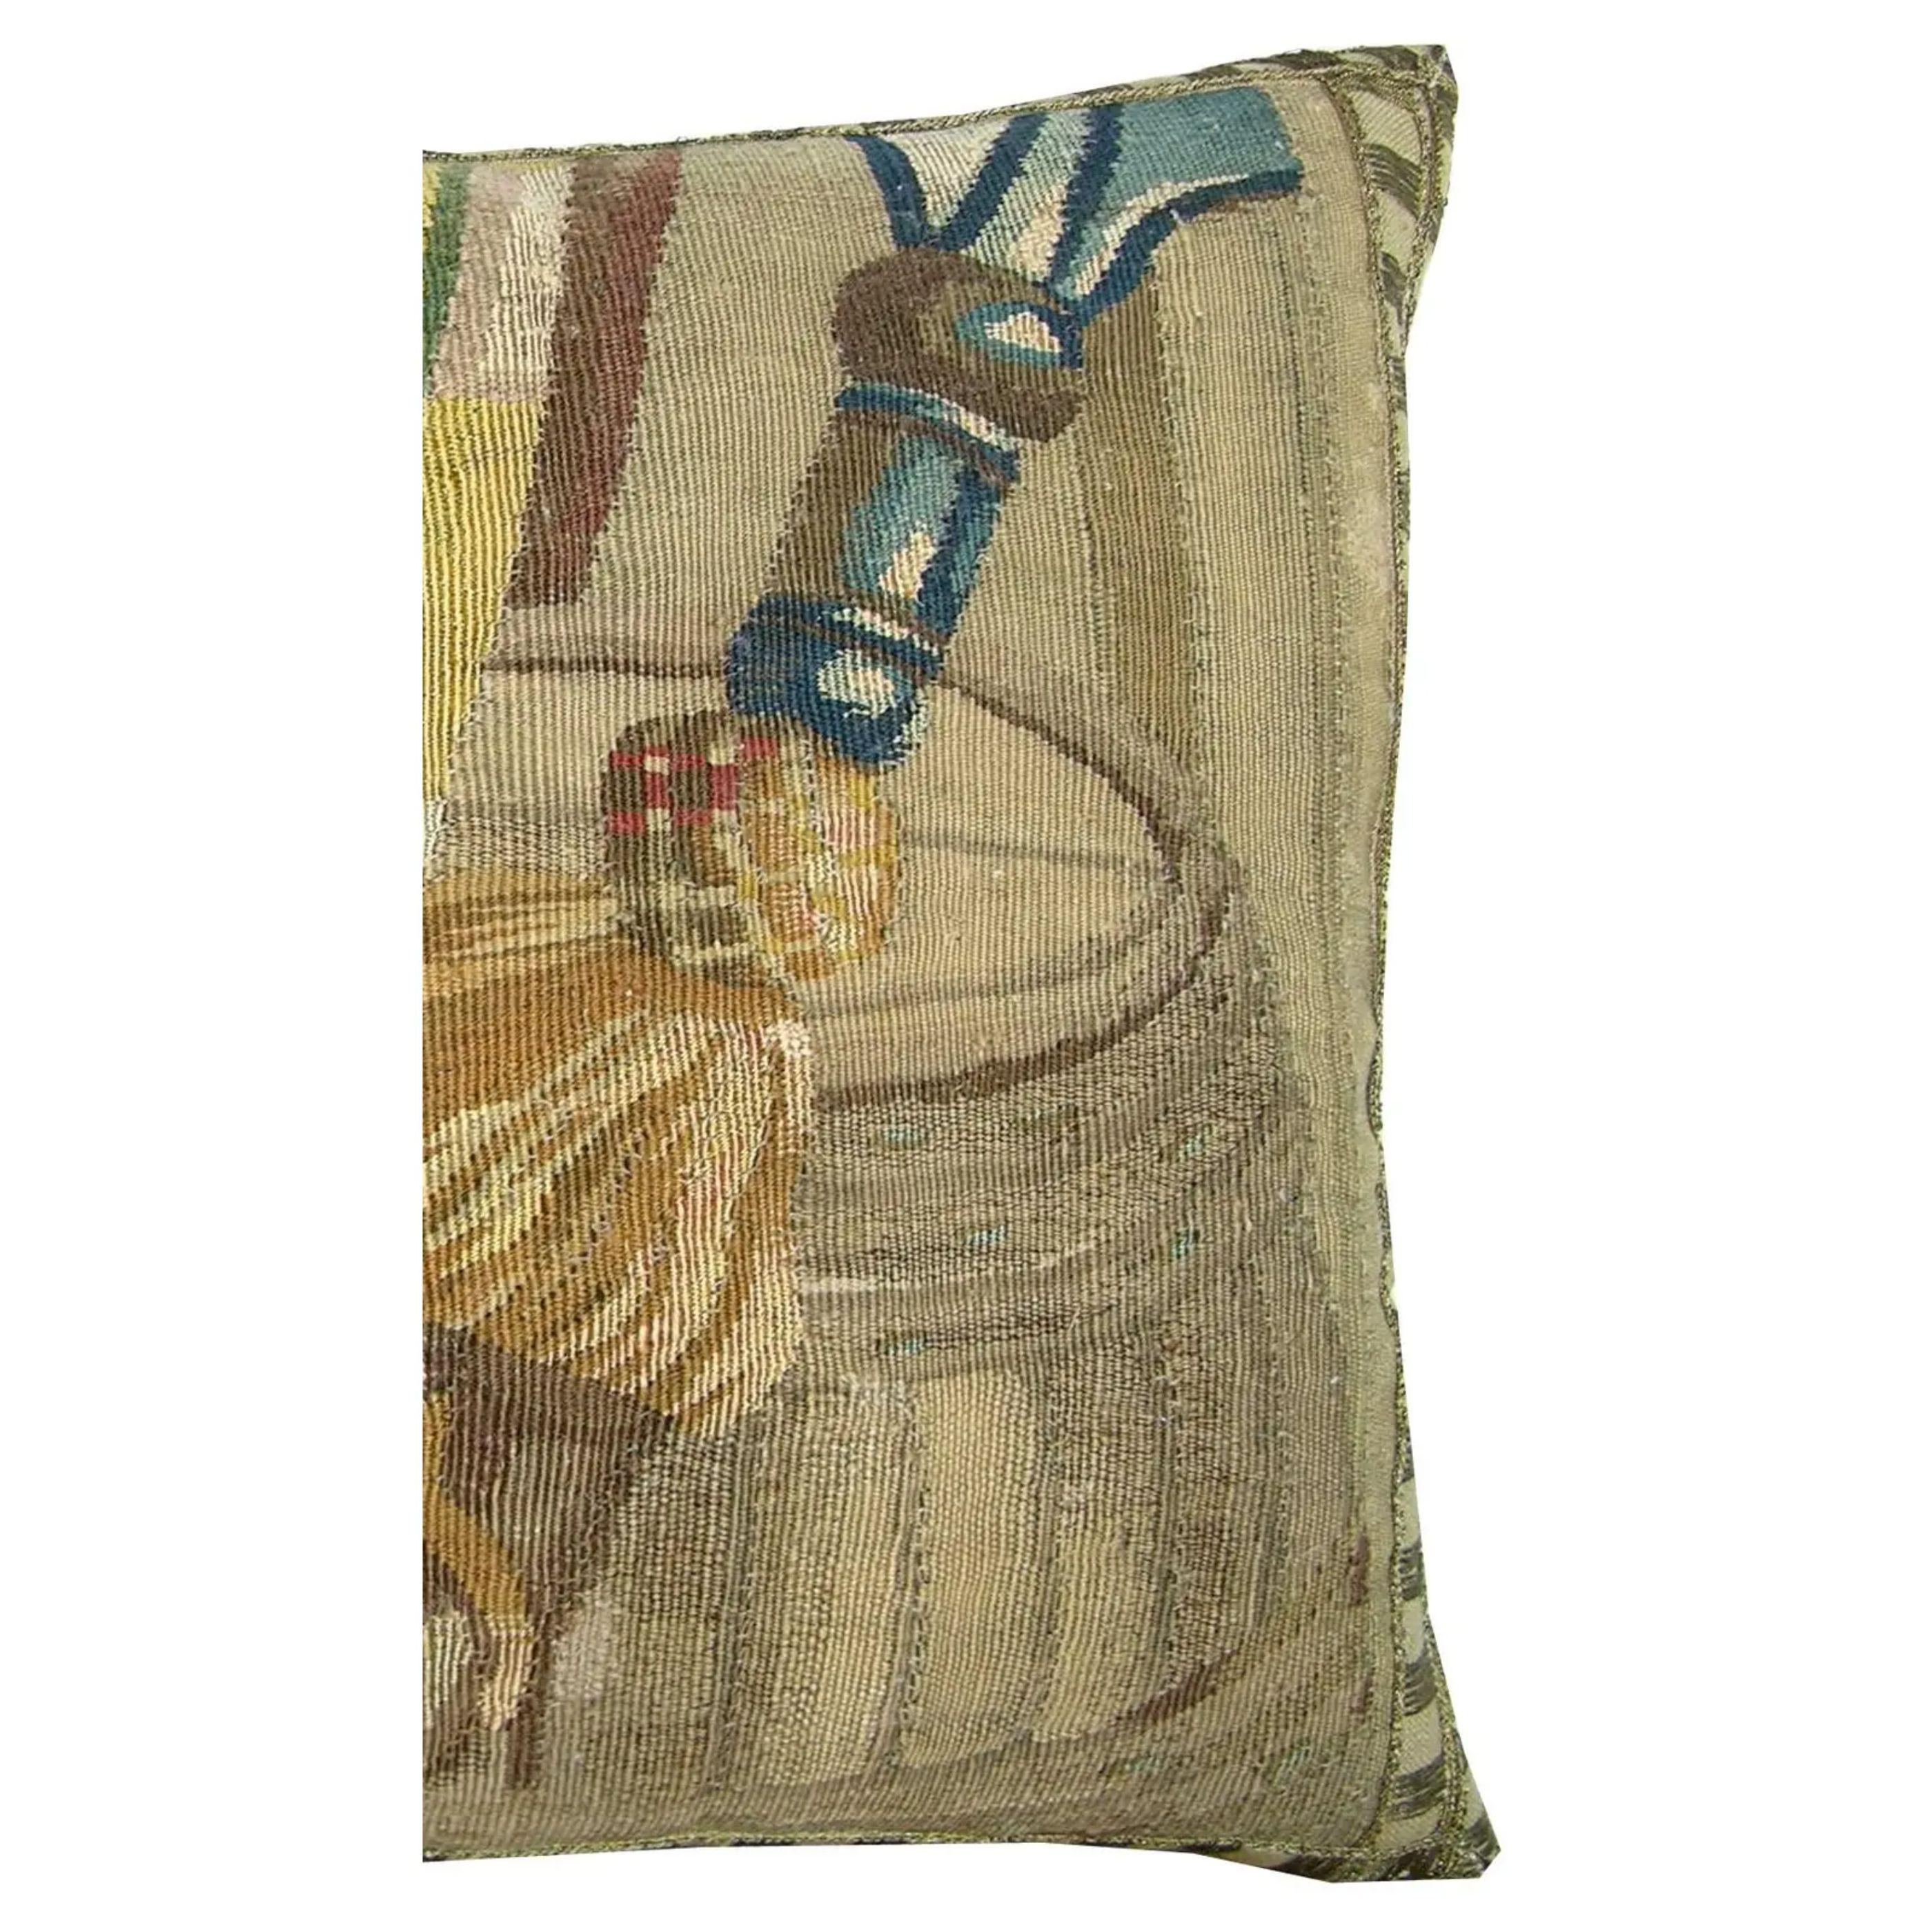 Ca.1700 Antique Brussels Tapestry Pillow - 19'' X 14'', Wool, Empire Traditional, Handmade and Needlework,